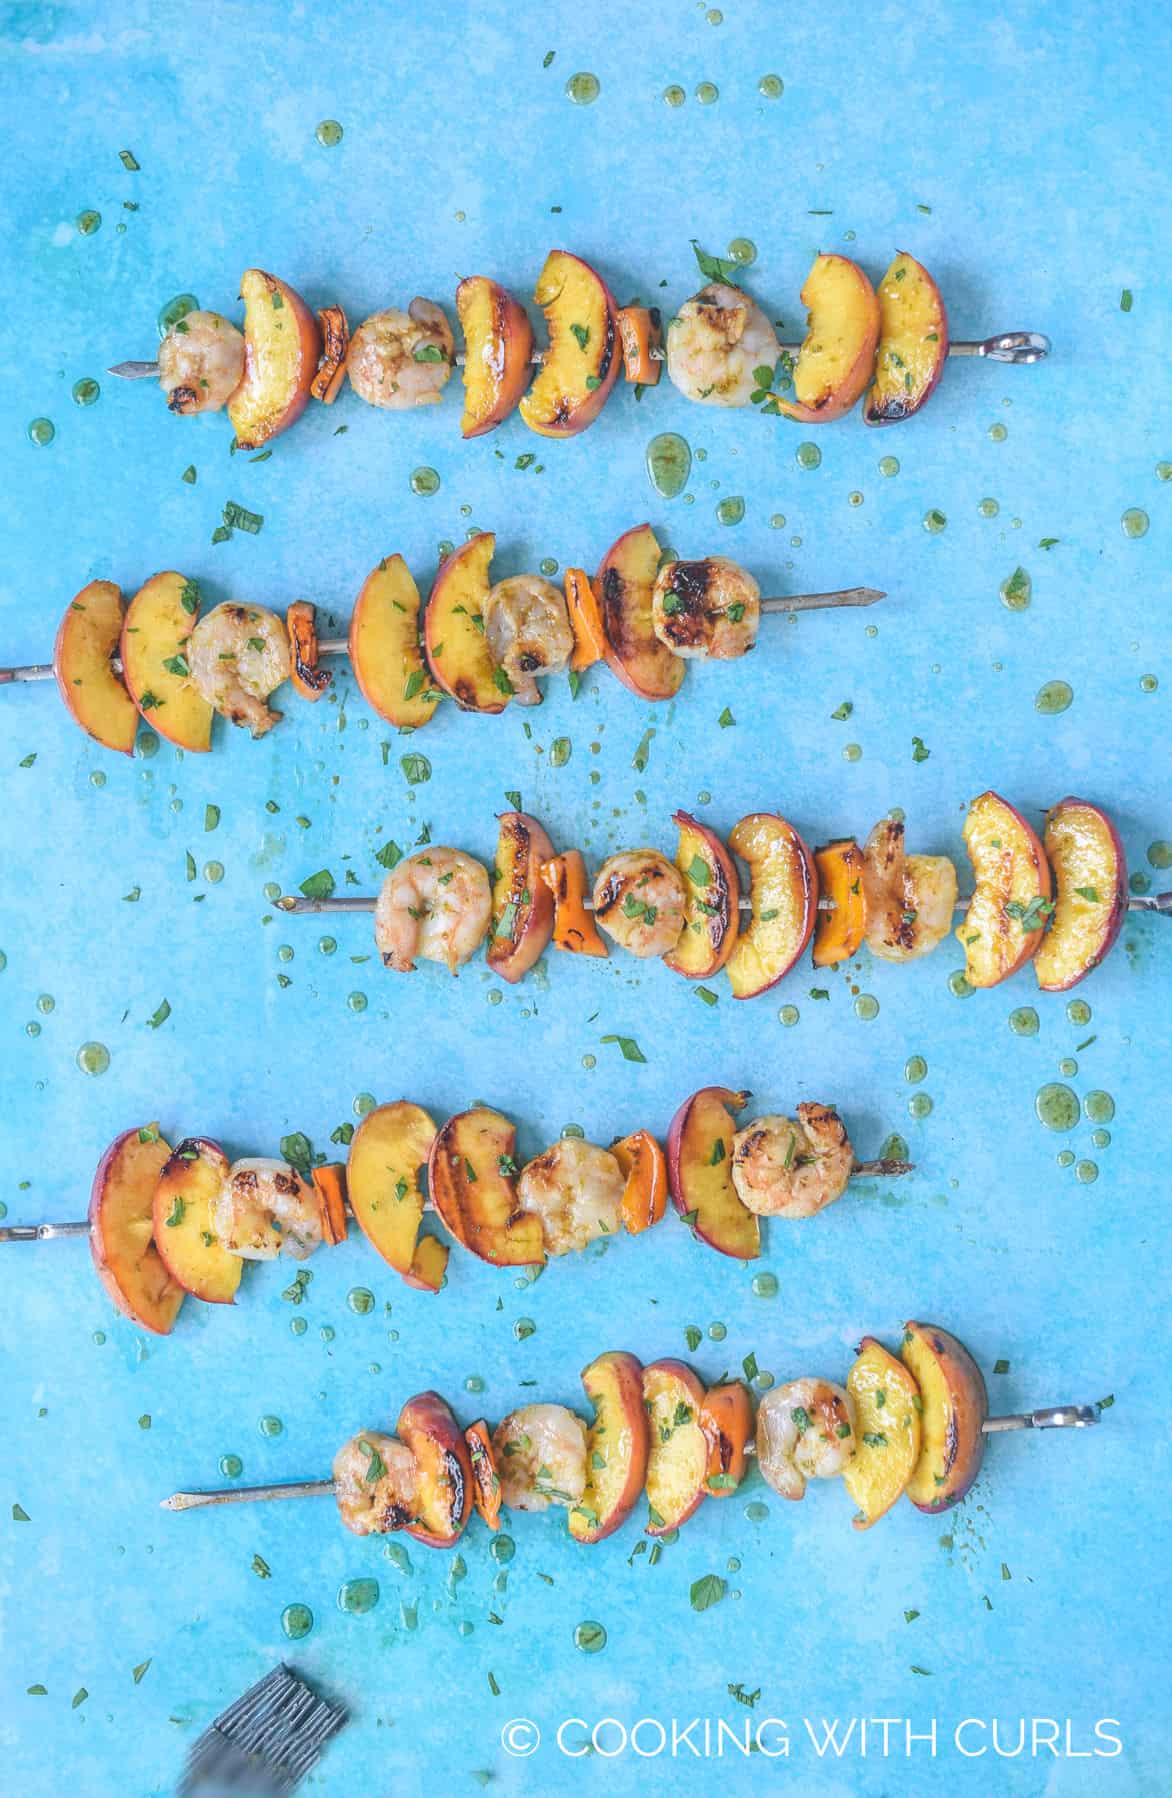 looking down on five metal skewers filled with shrimp, orange bell pepper and peach wedges drizzled with glaze on a blue background.